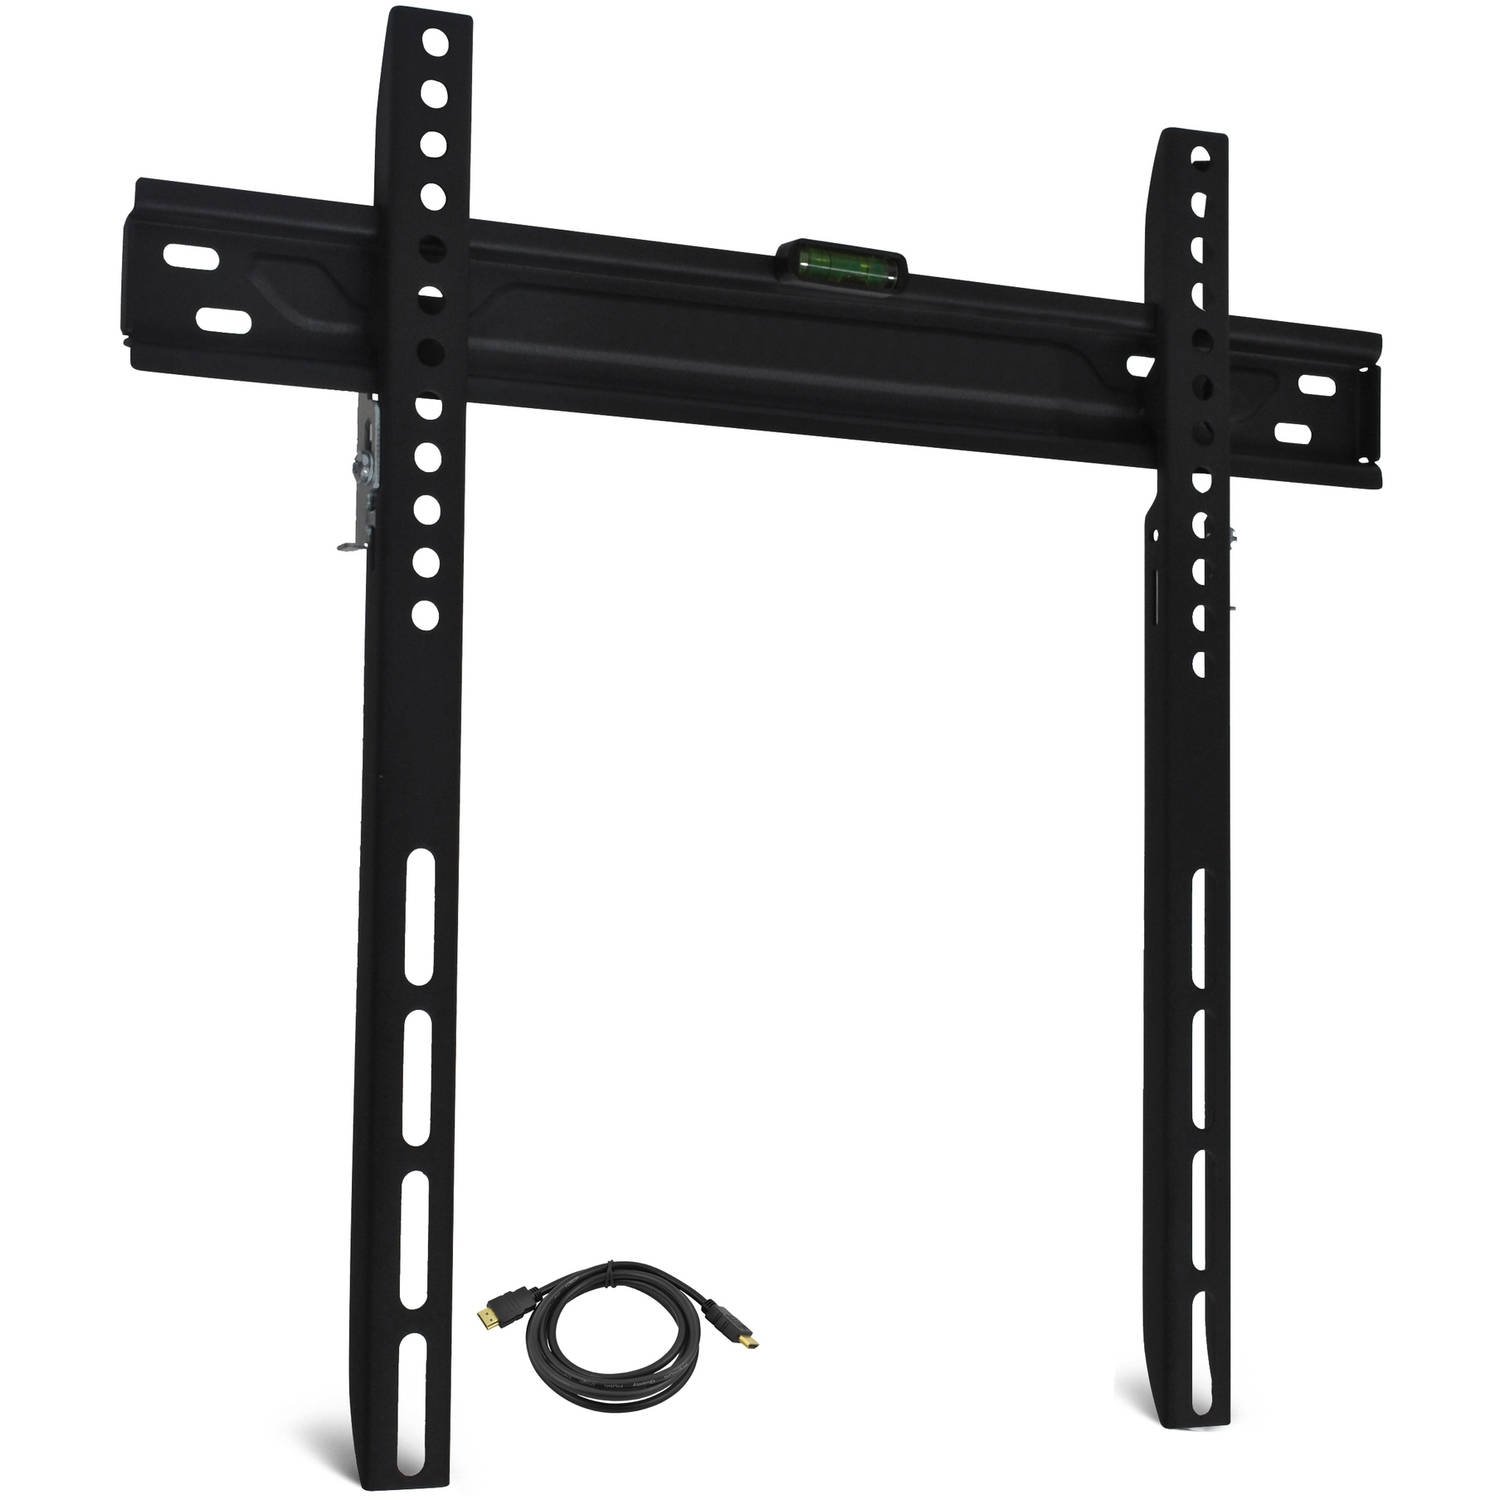 Low-Profile TV Wall Mount for 19"-60" TVs with HDMI Cable, UL Certified - image 1 of 8